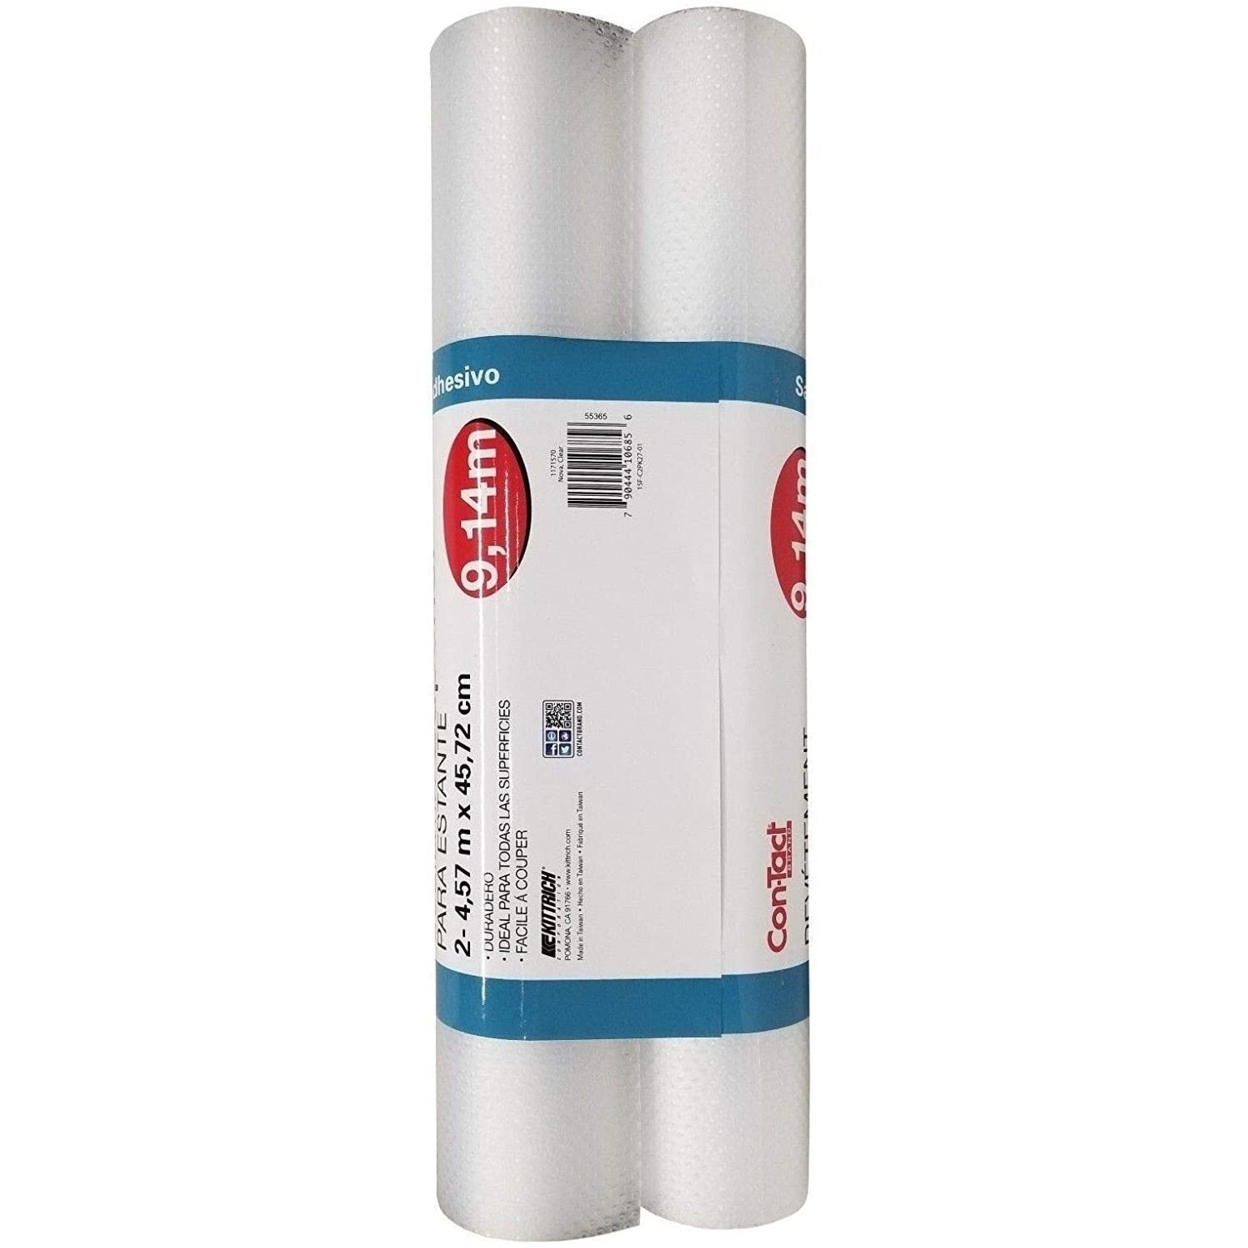 Con-Tact Premier Non-Adhesive Shelf Liner- 2 Pack